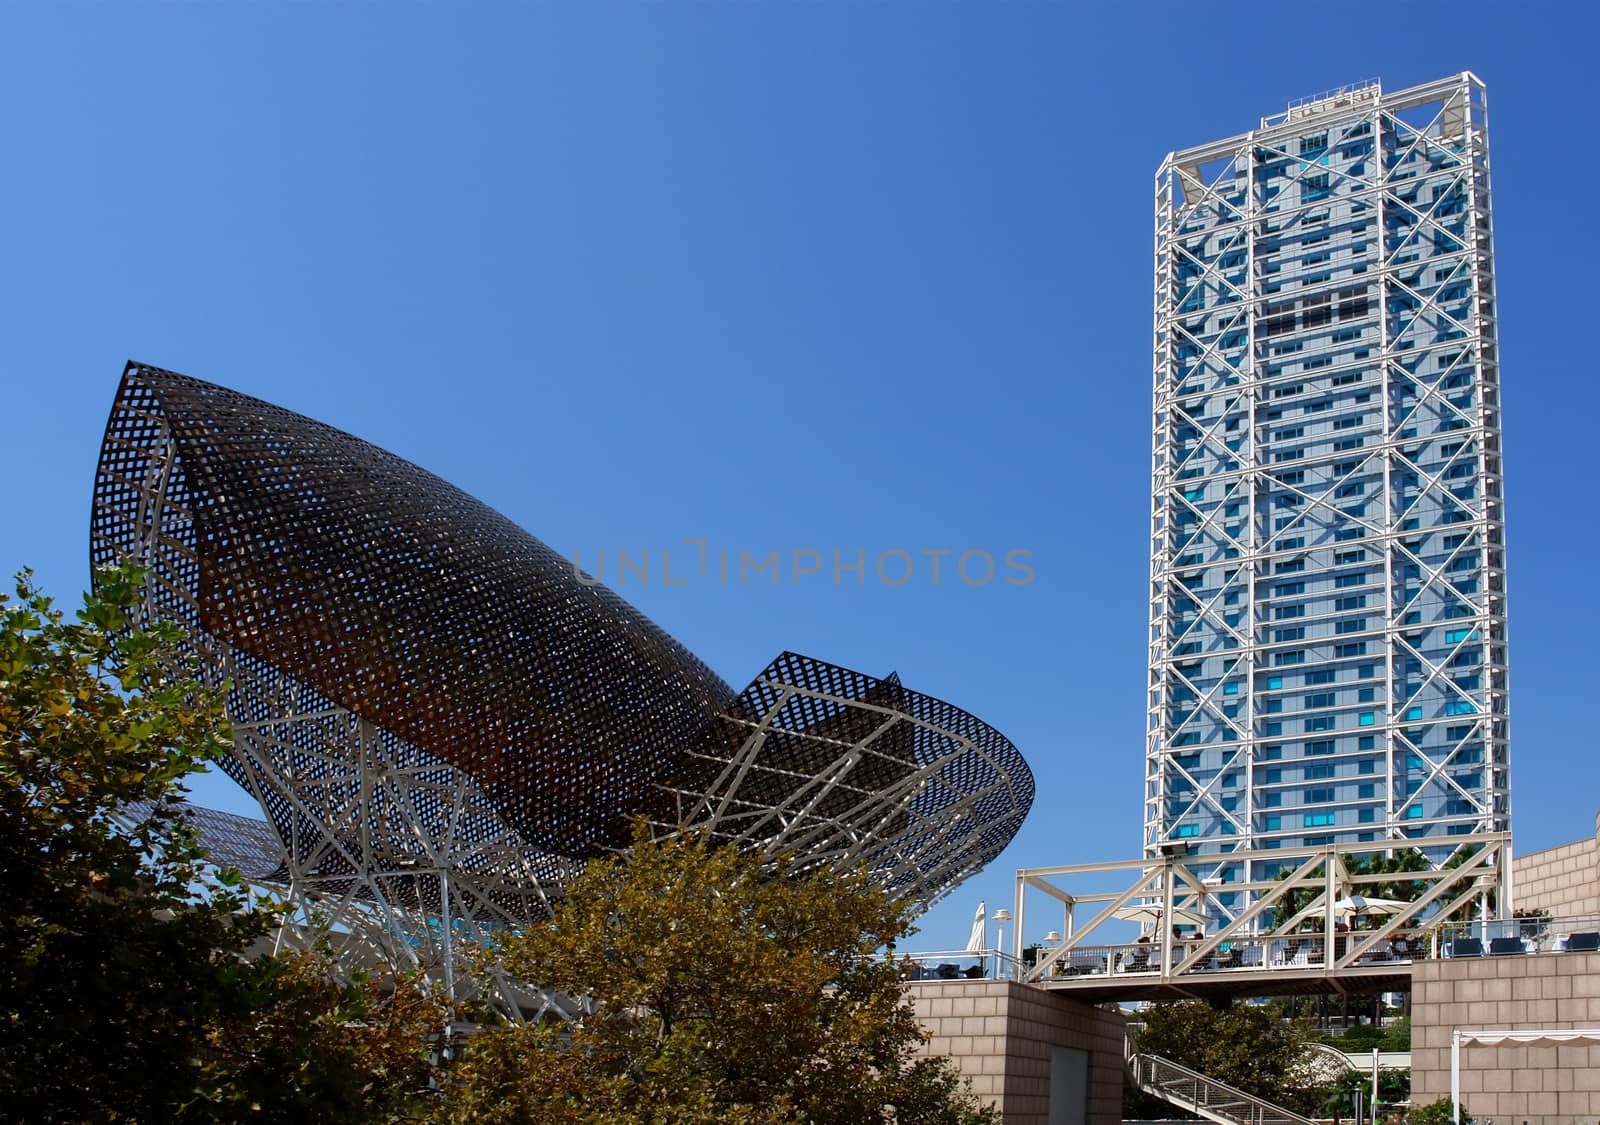  Modern architecture at Barcelona Olympic Port. by ptxgarfield